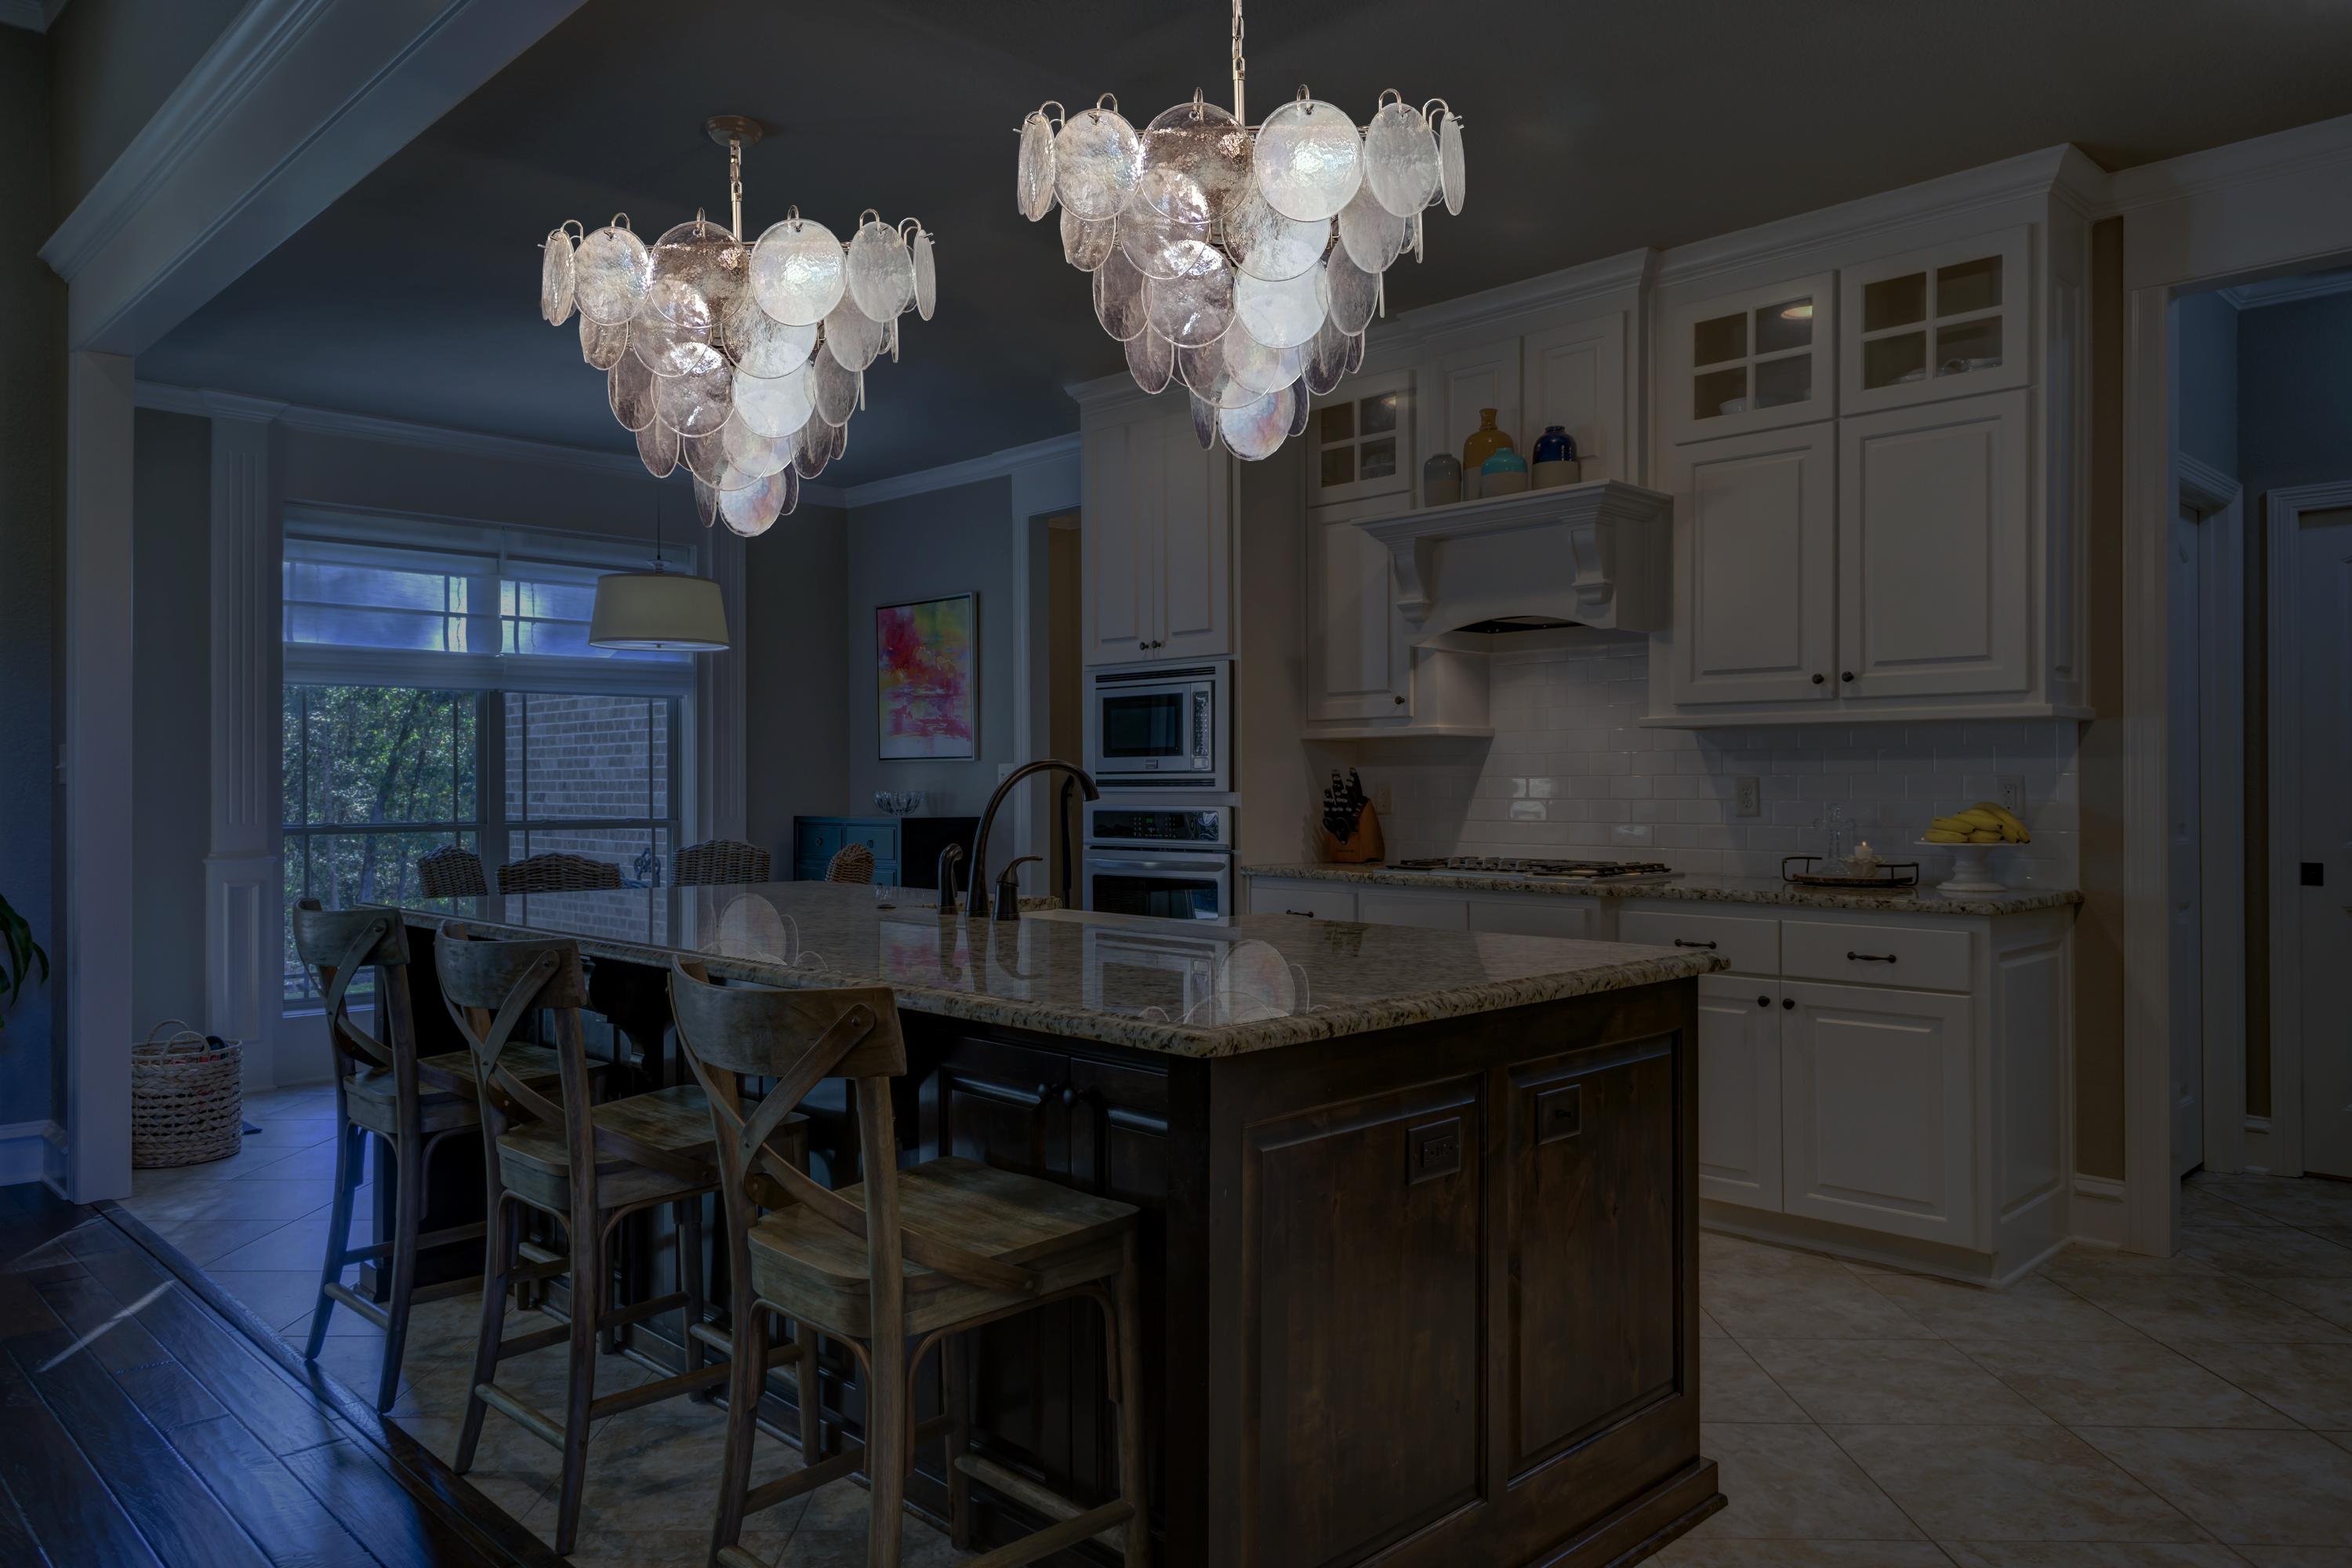 Italian Murano chandeliers. Each chandelier has 57 Murano iridescent glass disks. The glasses are now
unavailable, they have the particularity of reflecting a multiplicity of colors, which makes the chandelier a true work of art. Nickel metal